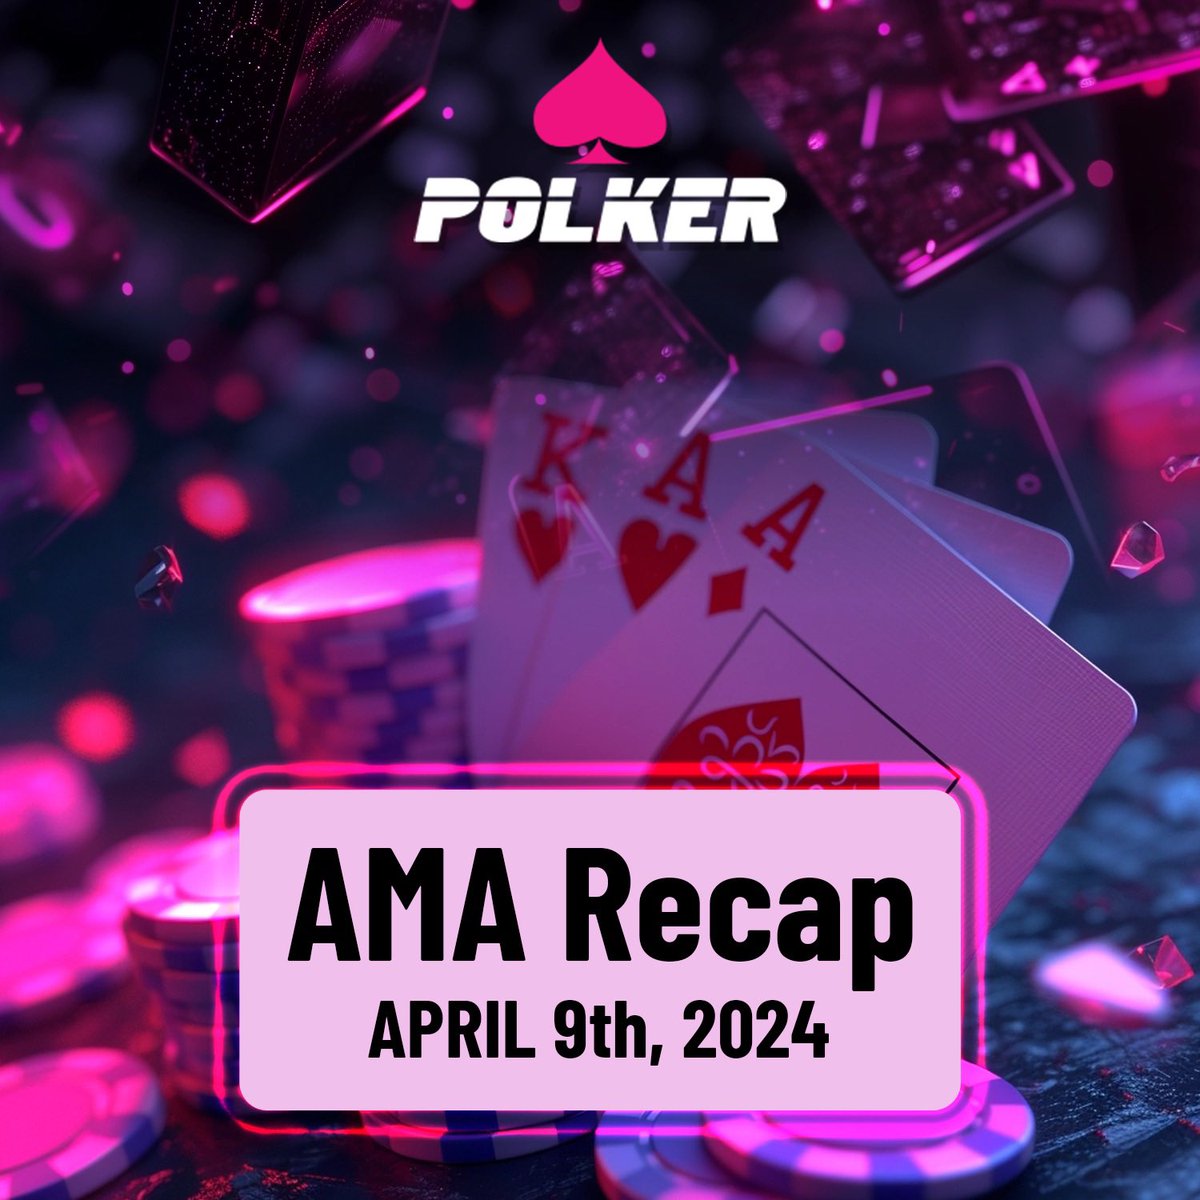 ♠️ ♥️ ♣️♦️POLKERCREW ♠️ ♥️♣️♦️ 🔔AMA Recap Alert 🔔 Missed our latest Ask Me Anything session? 😟 Don’t fret! You can check out the recap now and be in the know! Read the latest insights shared during the AMA. 👨‍💻 polker-pkr.medium.com/polker-ama-rec… Got more questions? Send them in